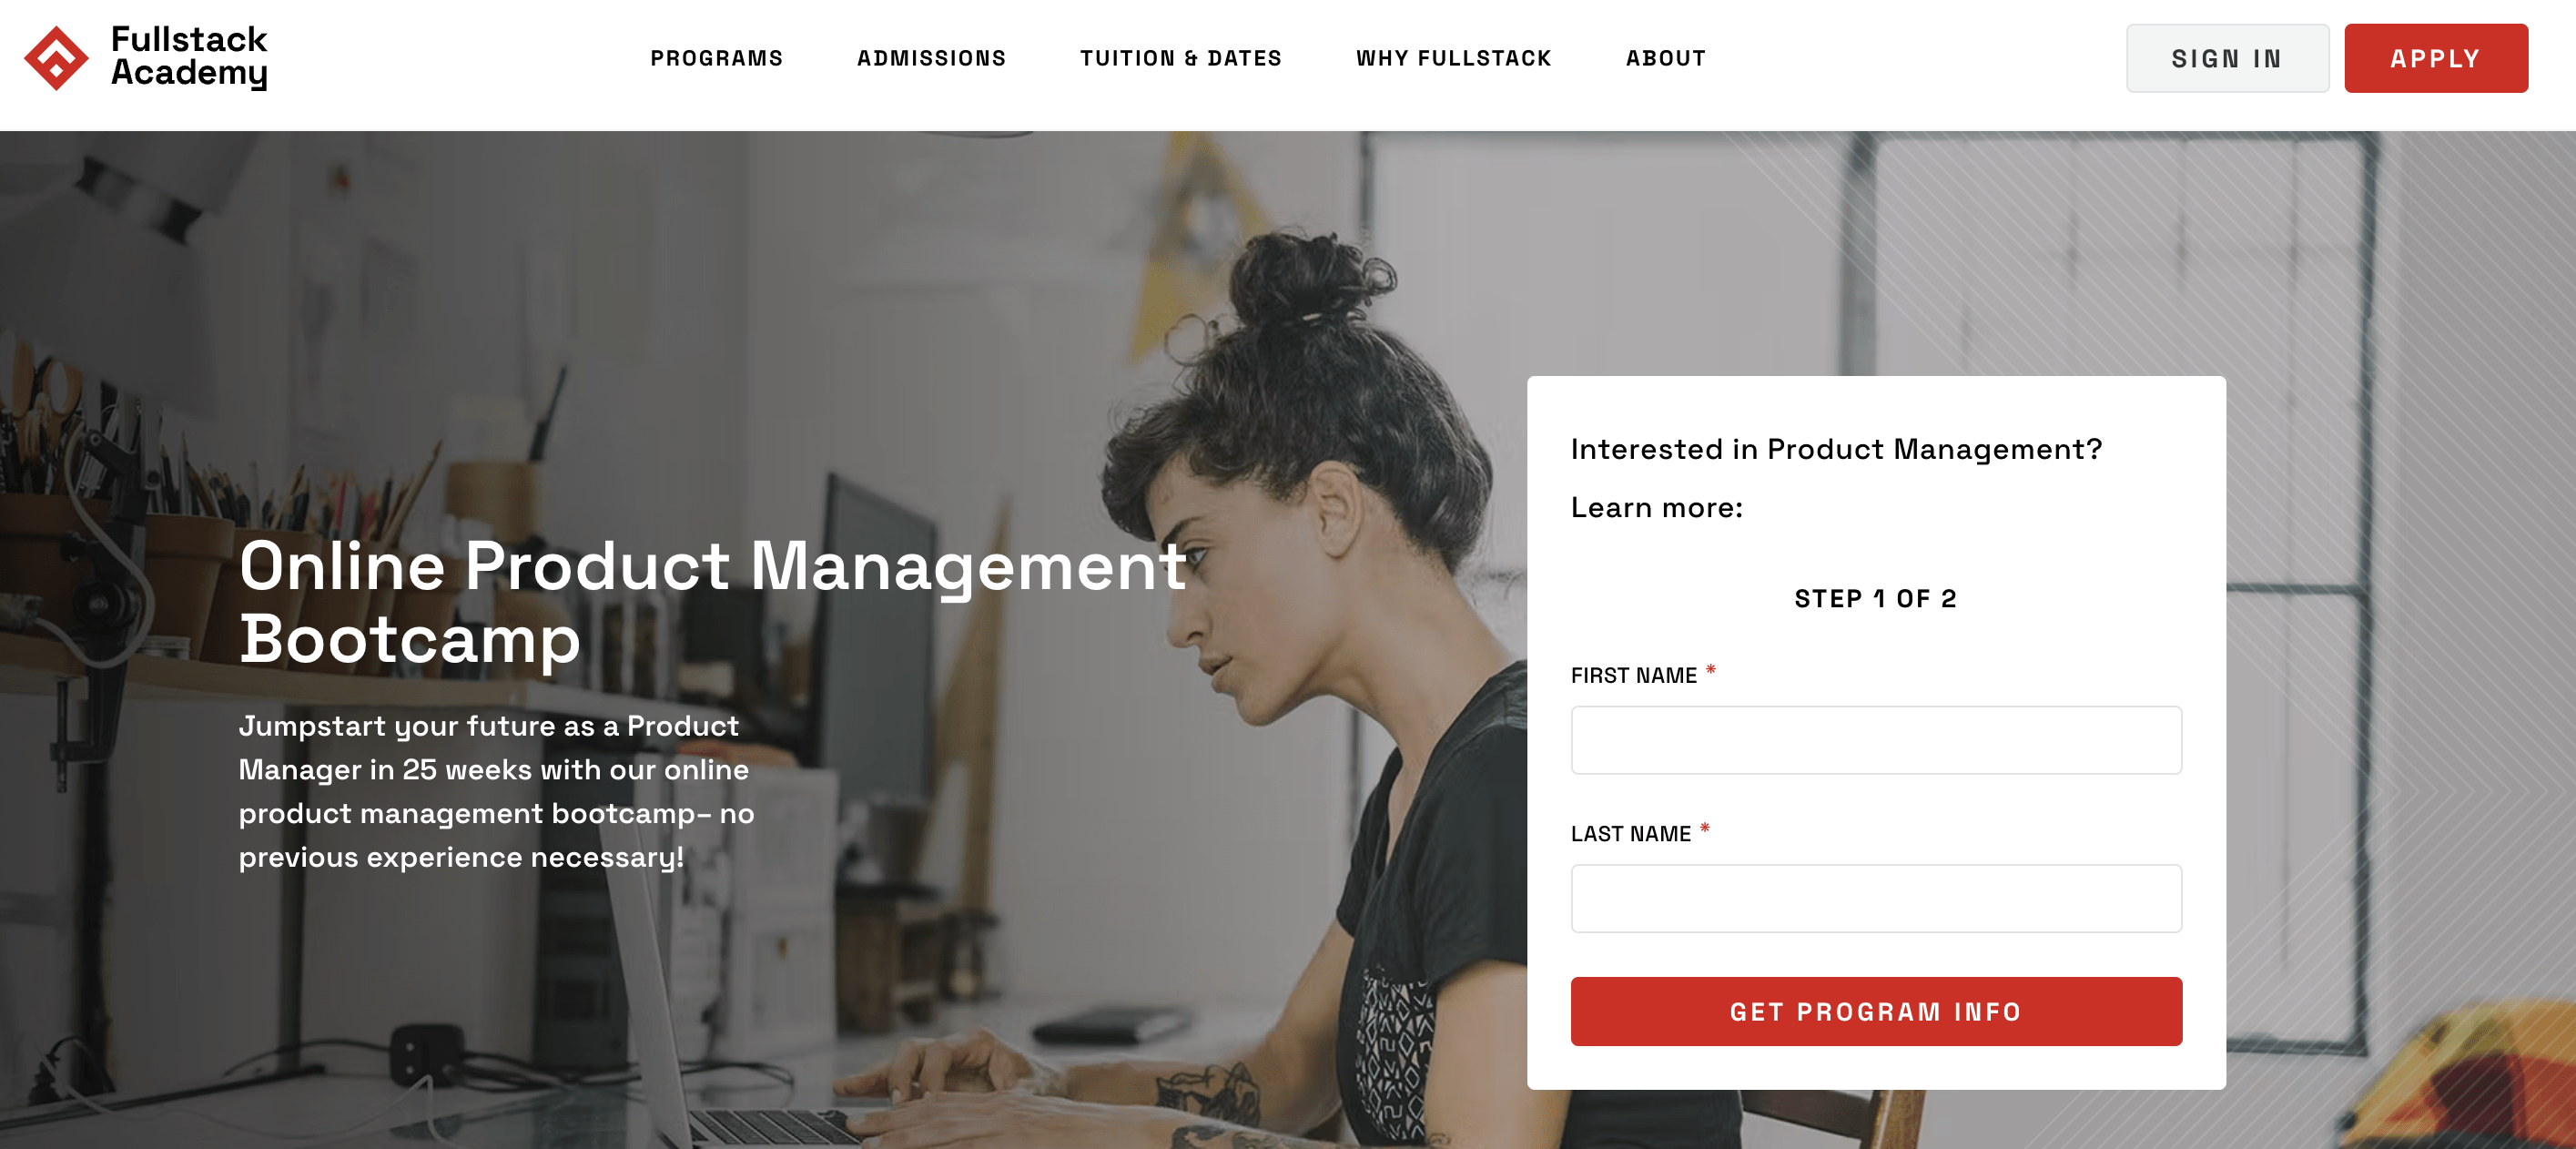 Screenshot of the Fullstack Academy product management bootcamp homepage.